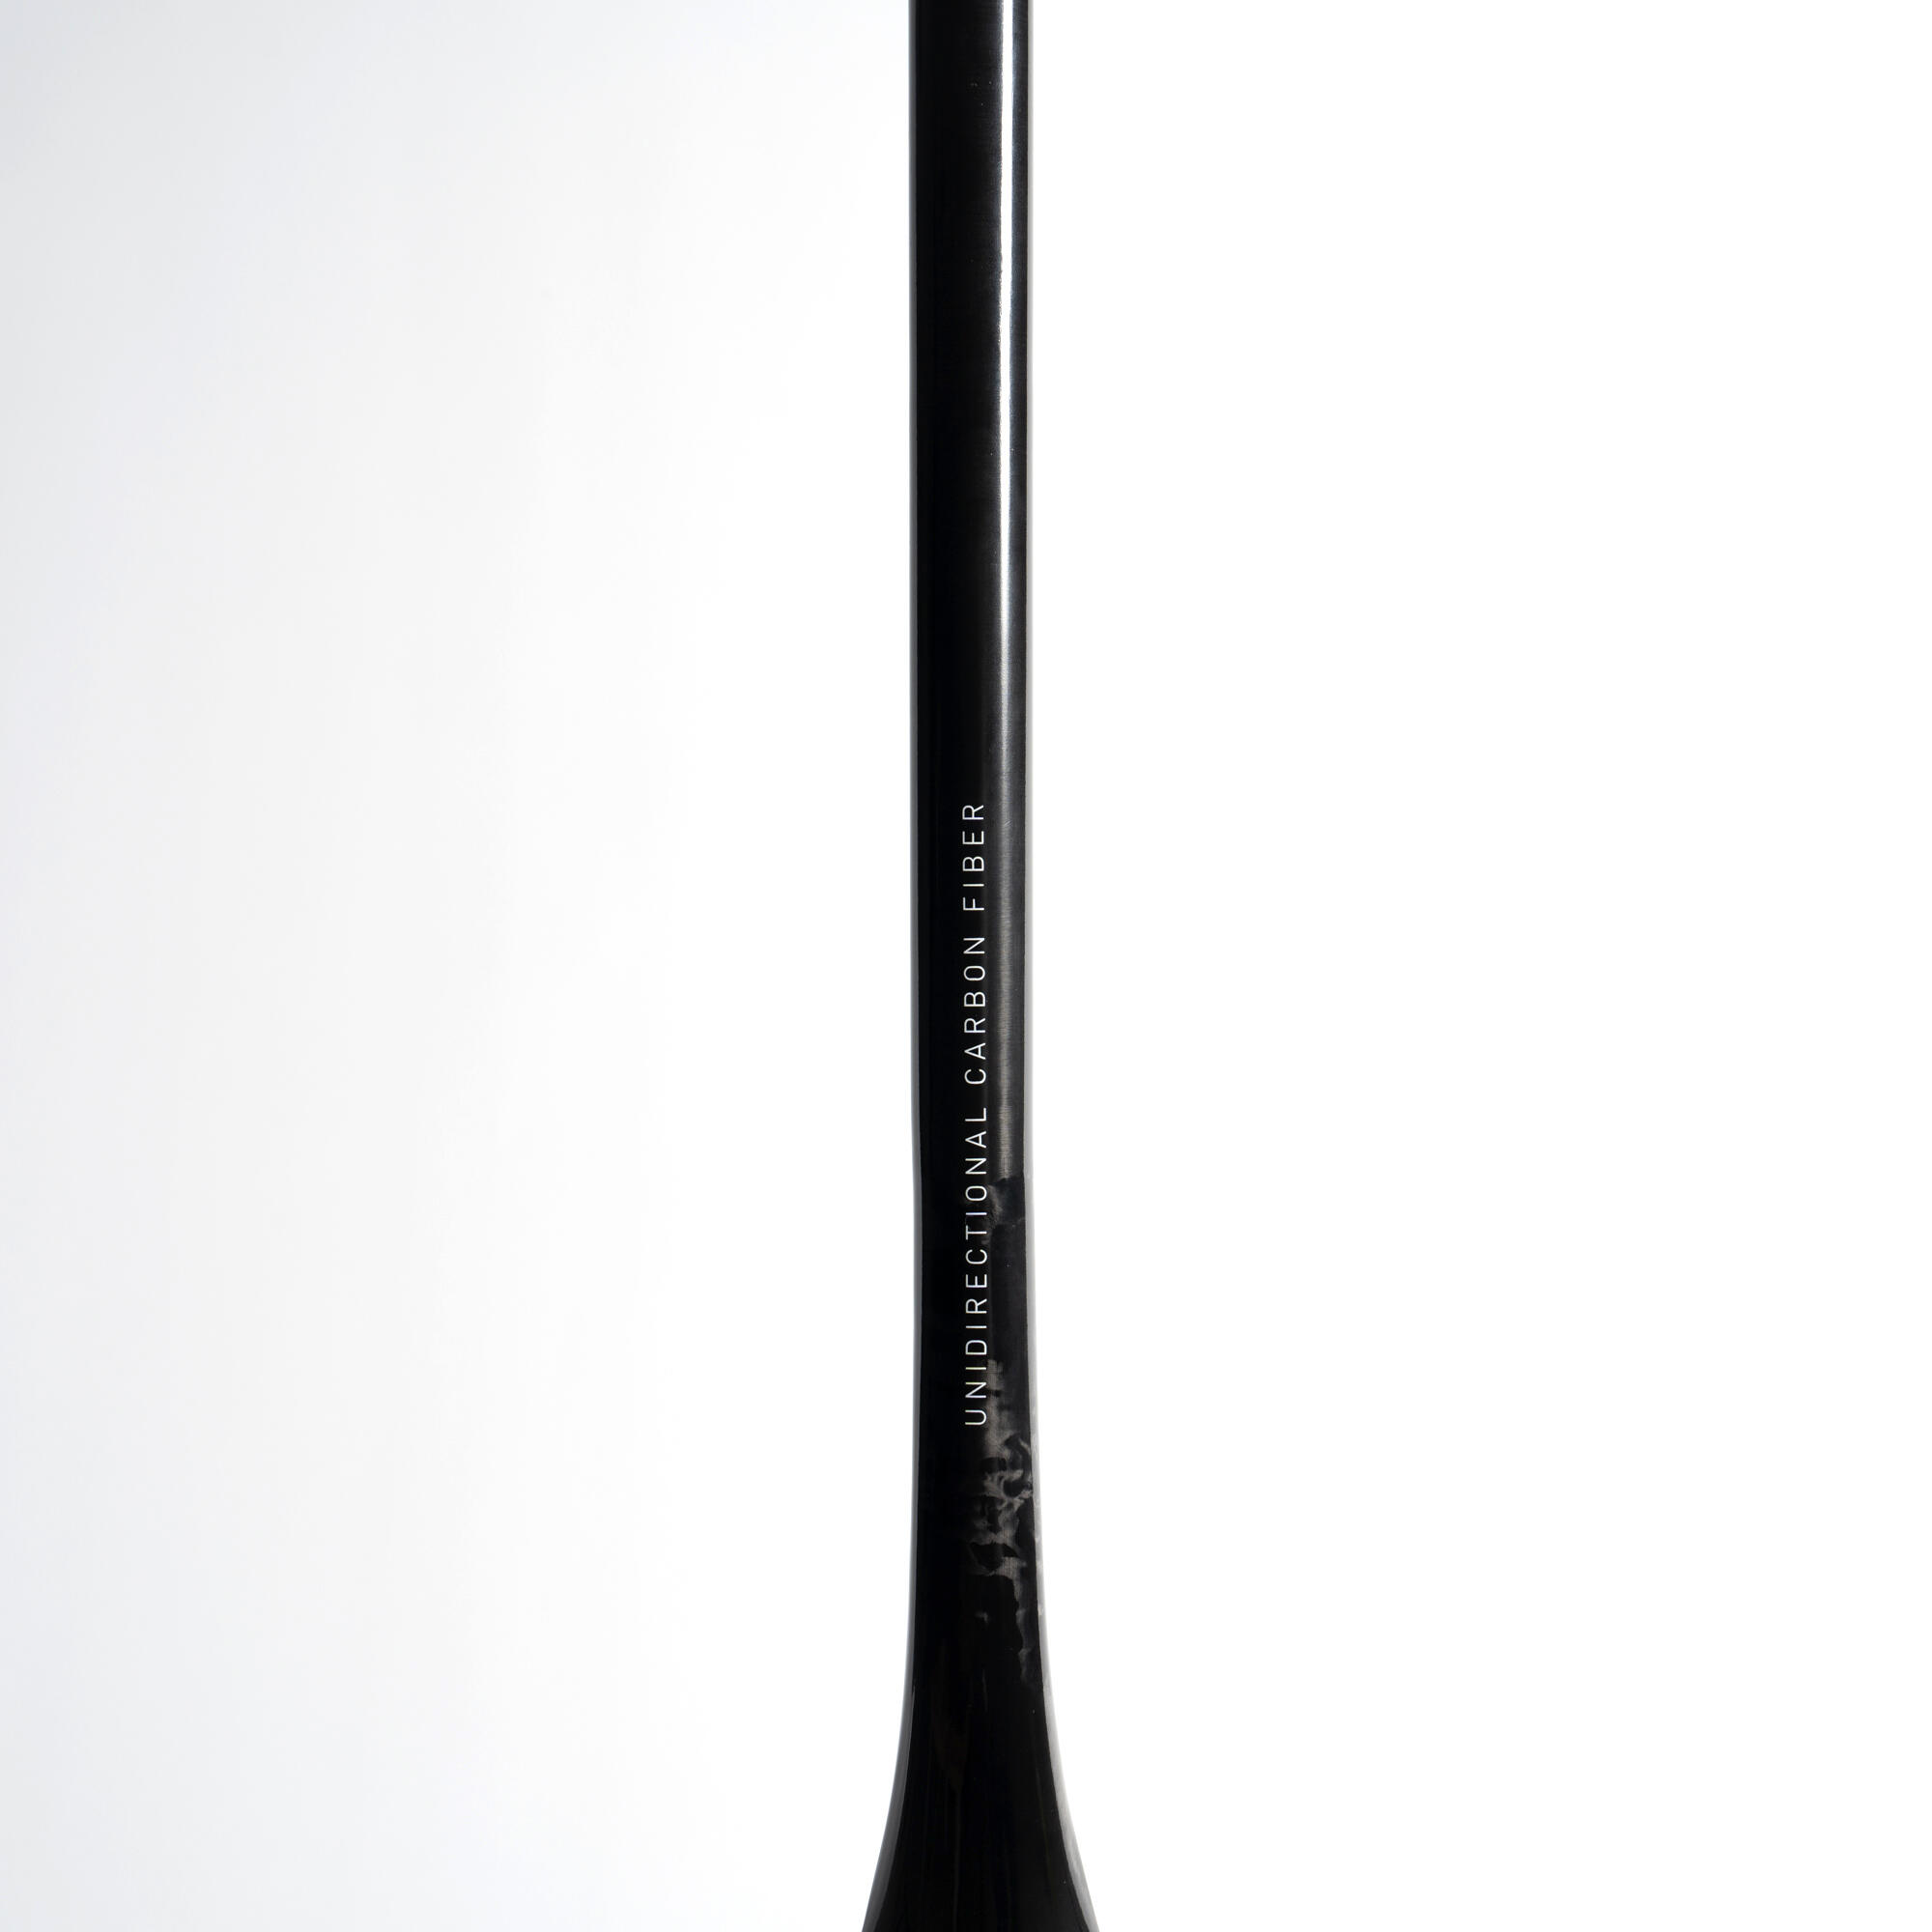 SUP paddle 900 pro carbon, adjustable in 2 sections. (165–205 cm) 12/15